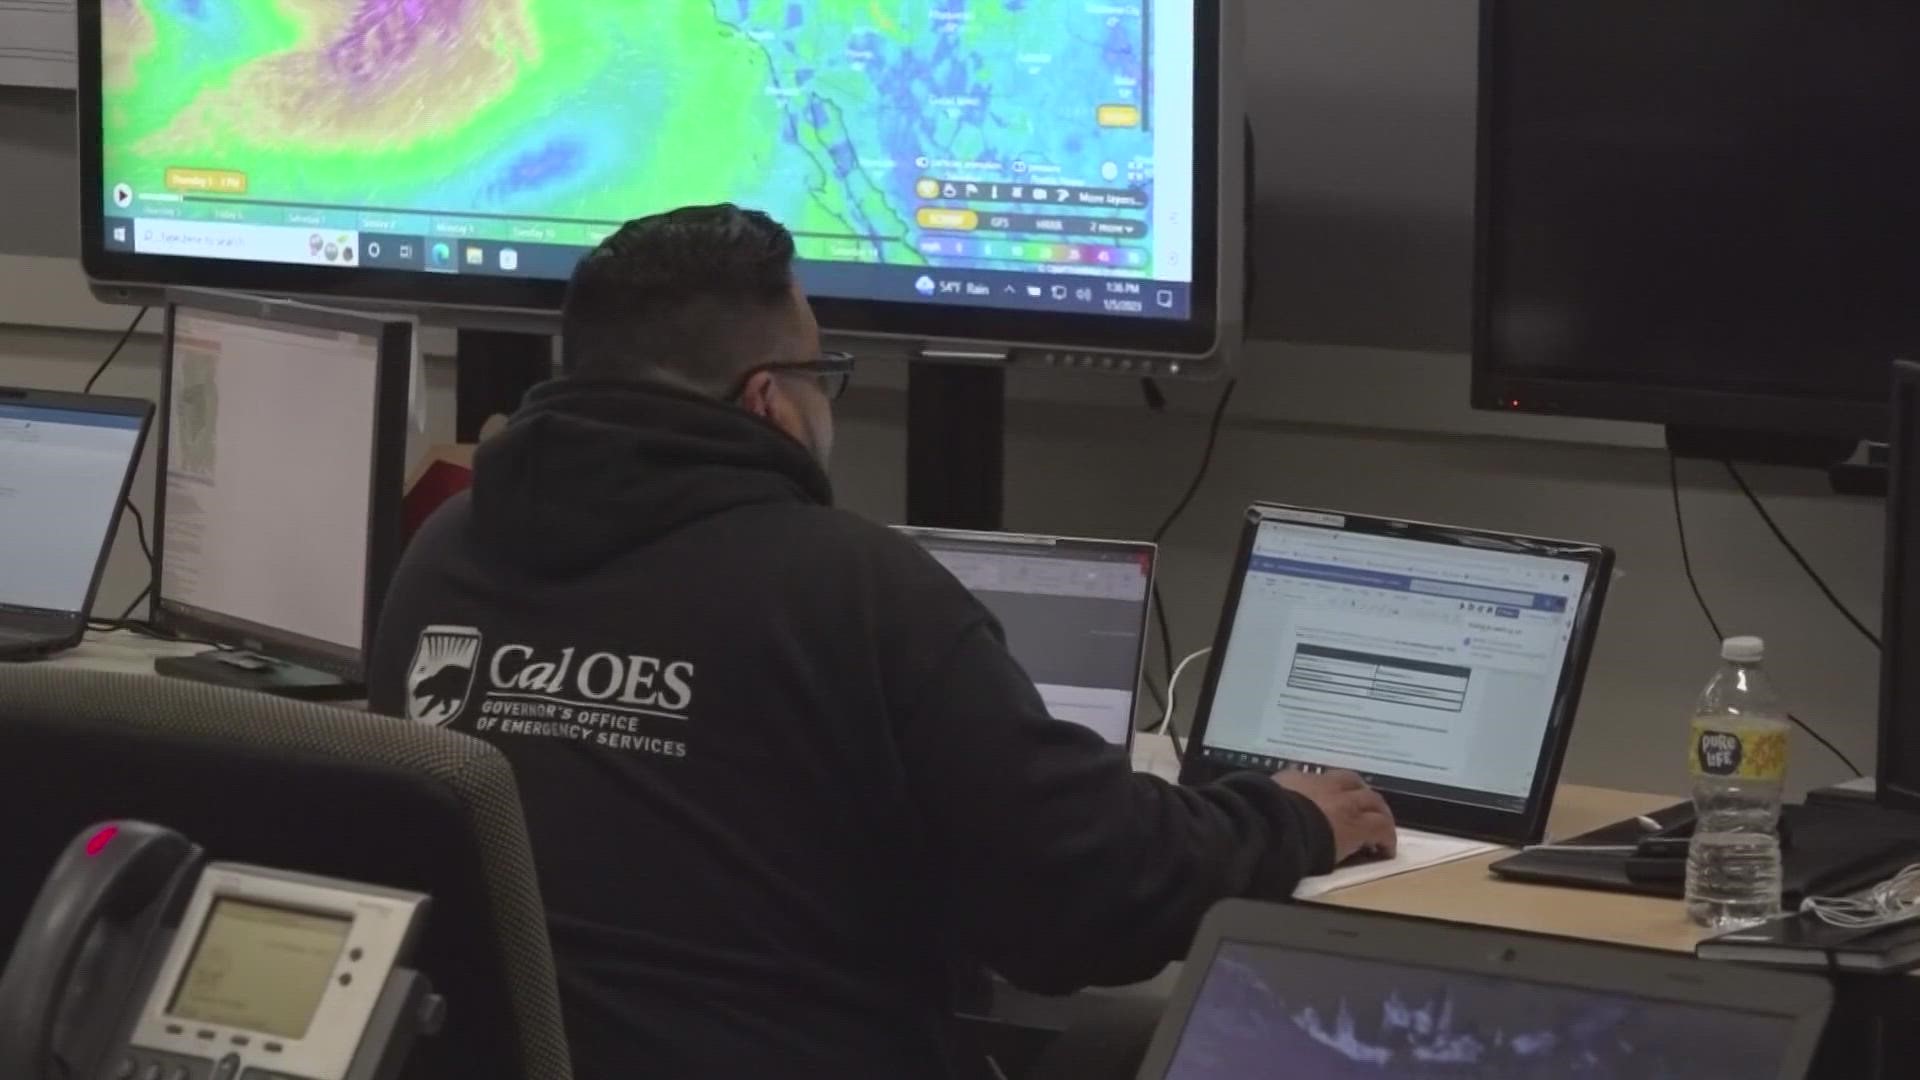 According to the San Joaquin County's top emergency official, neither levee breaches nor storm-related deaths have been reported in the county so far.